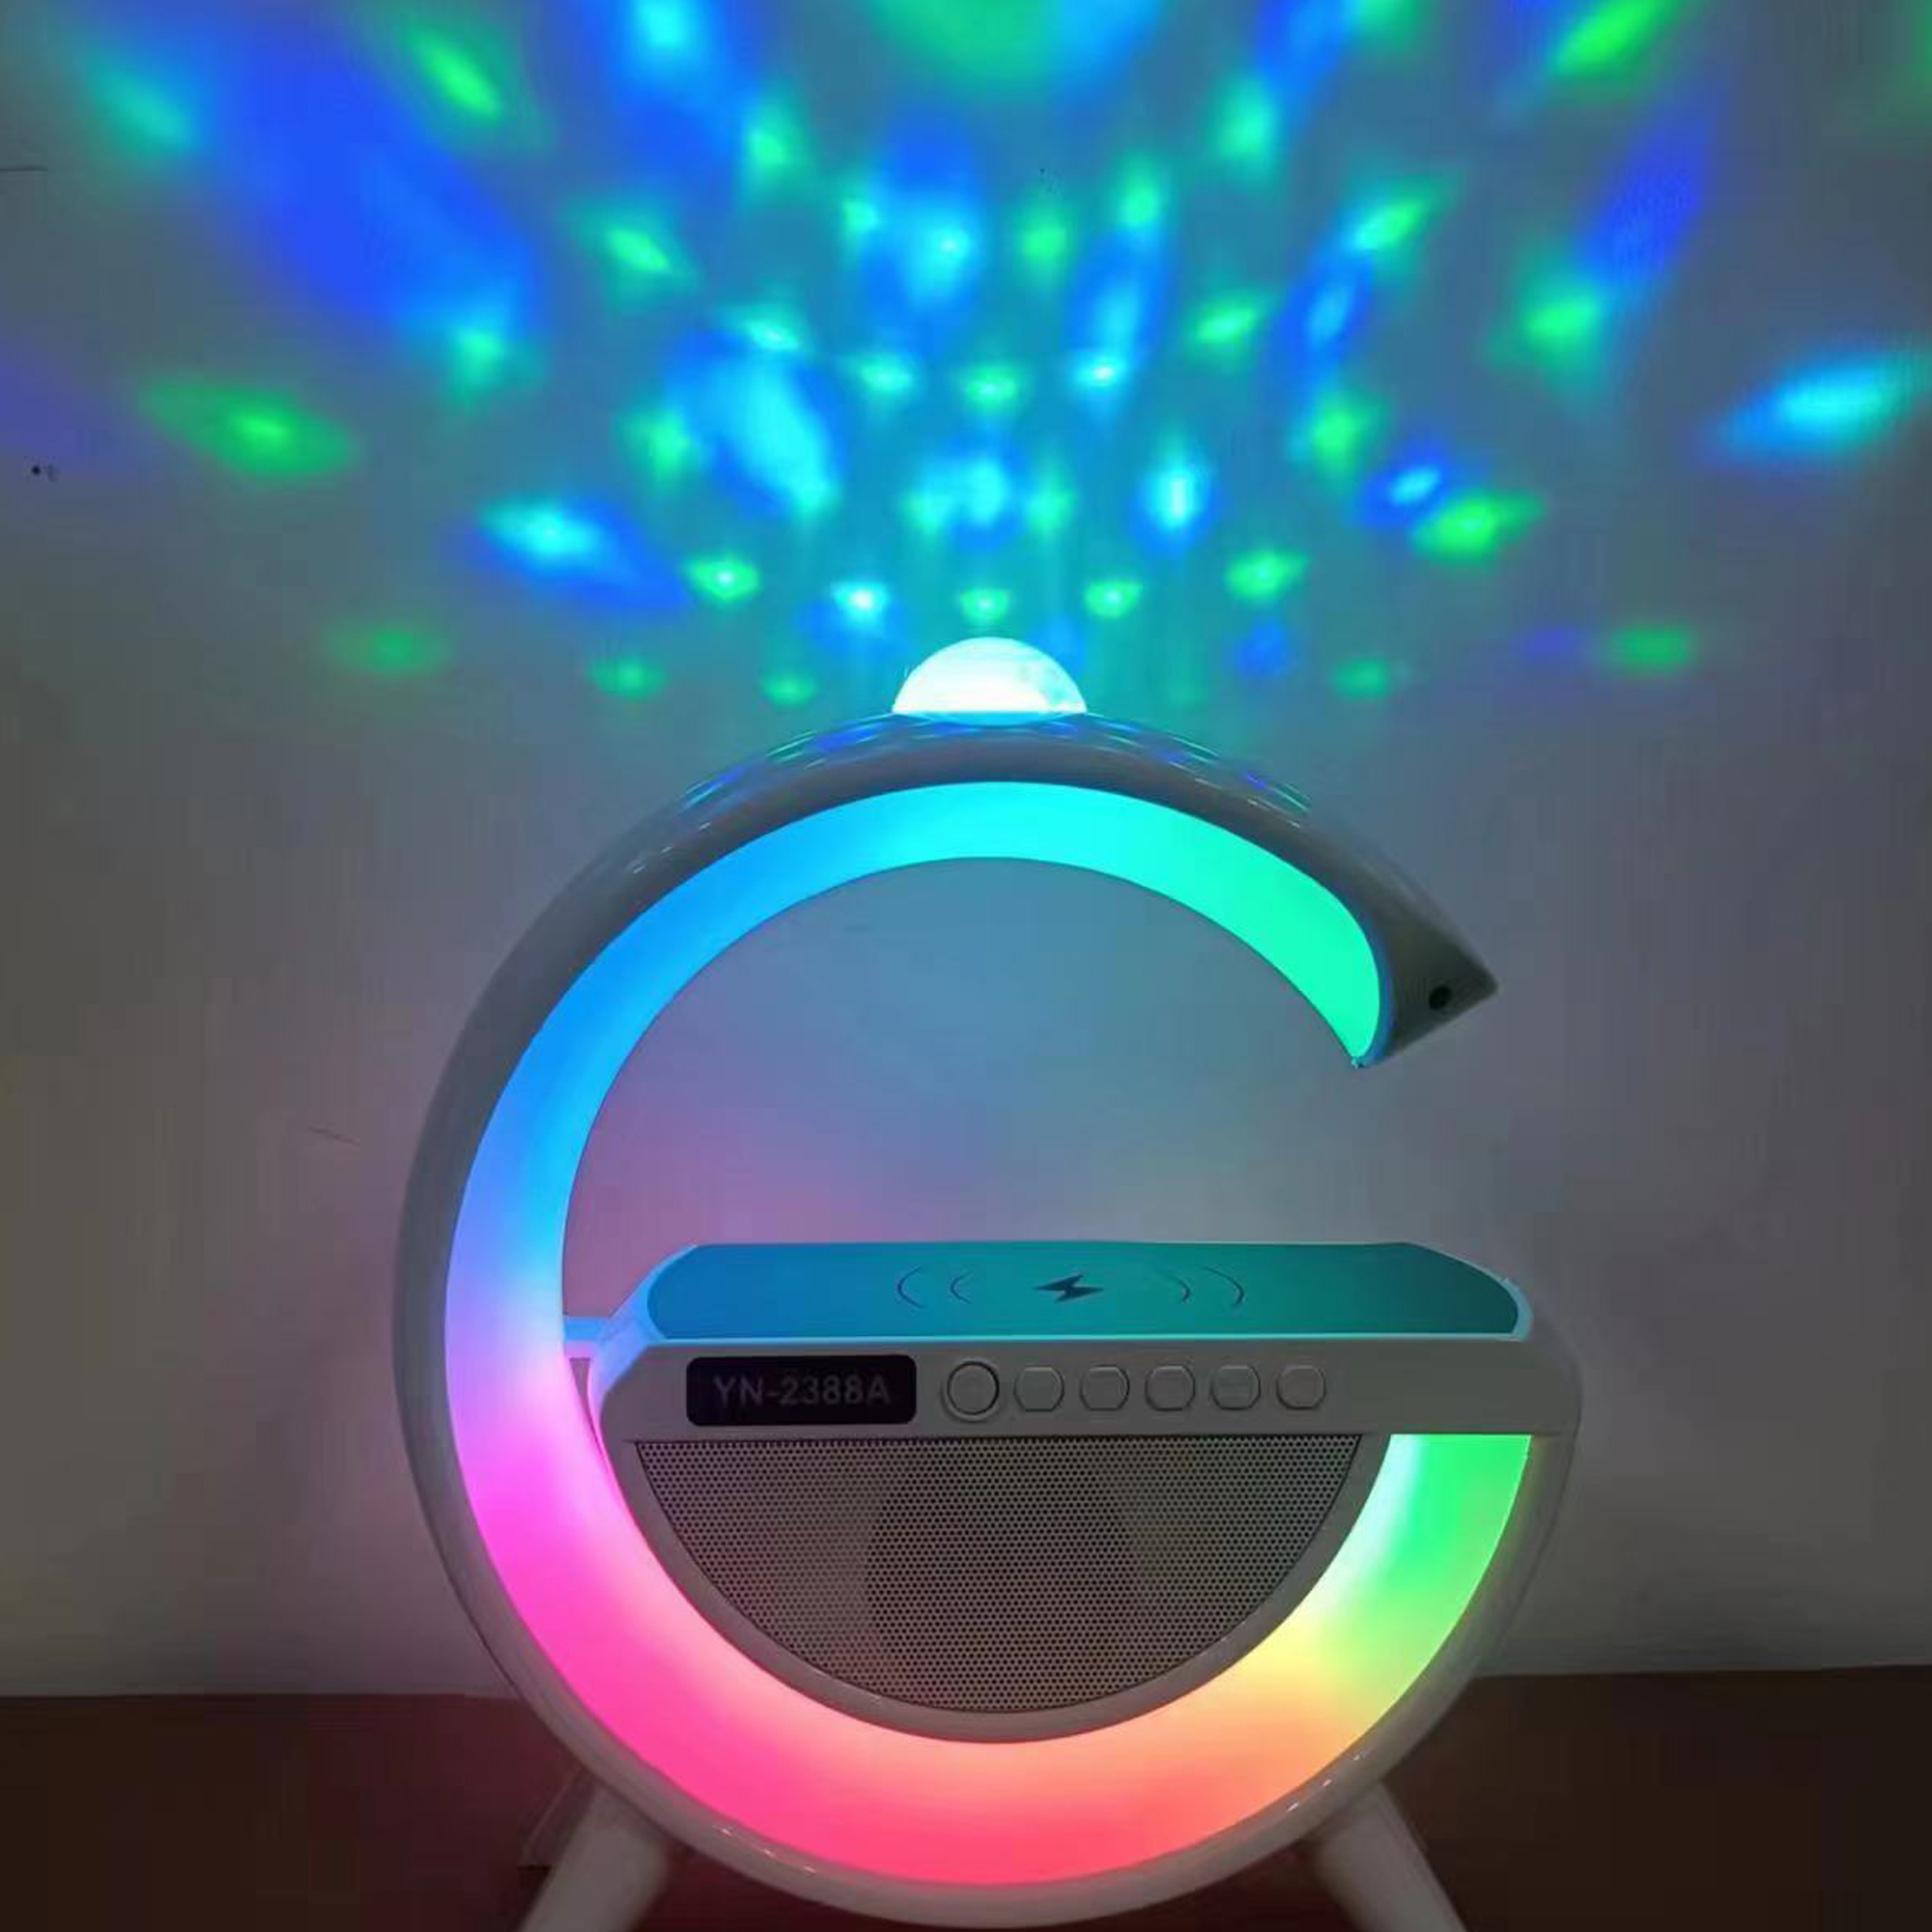 Bluetooth Audio Dimmable Night Light G Shaped Speaker with Wireless Charger,LED Colorful Atmosphere Table Lamp,Bedroom Home Decor,Party Favors,Adult Gift